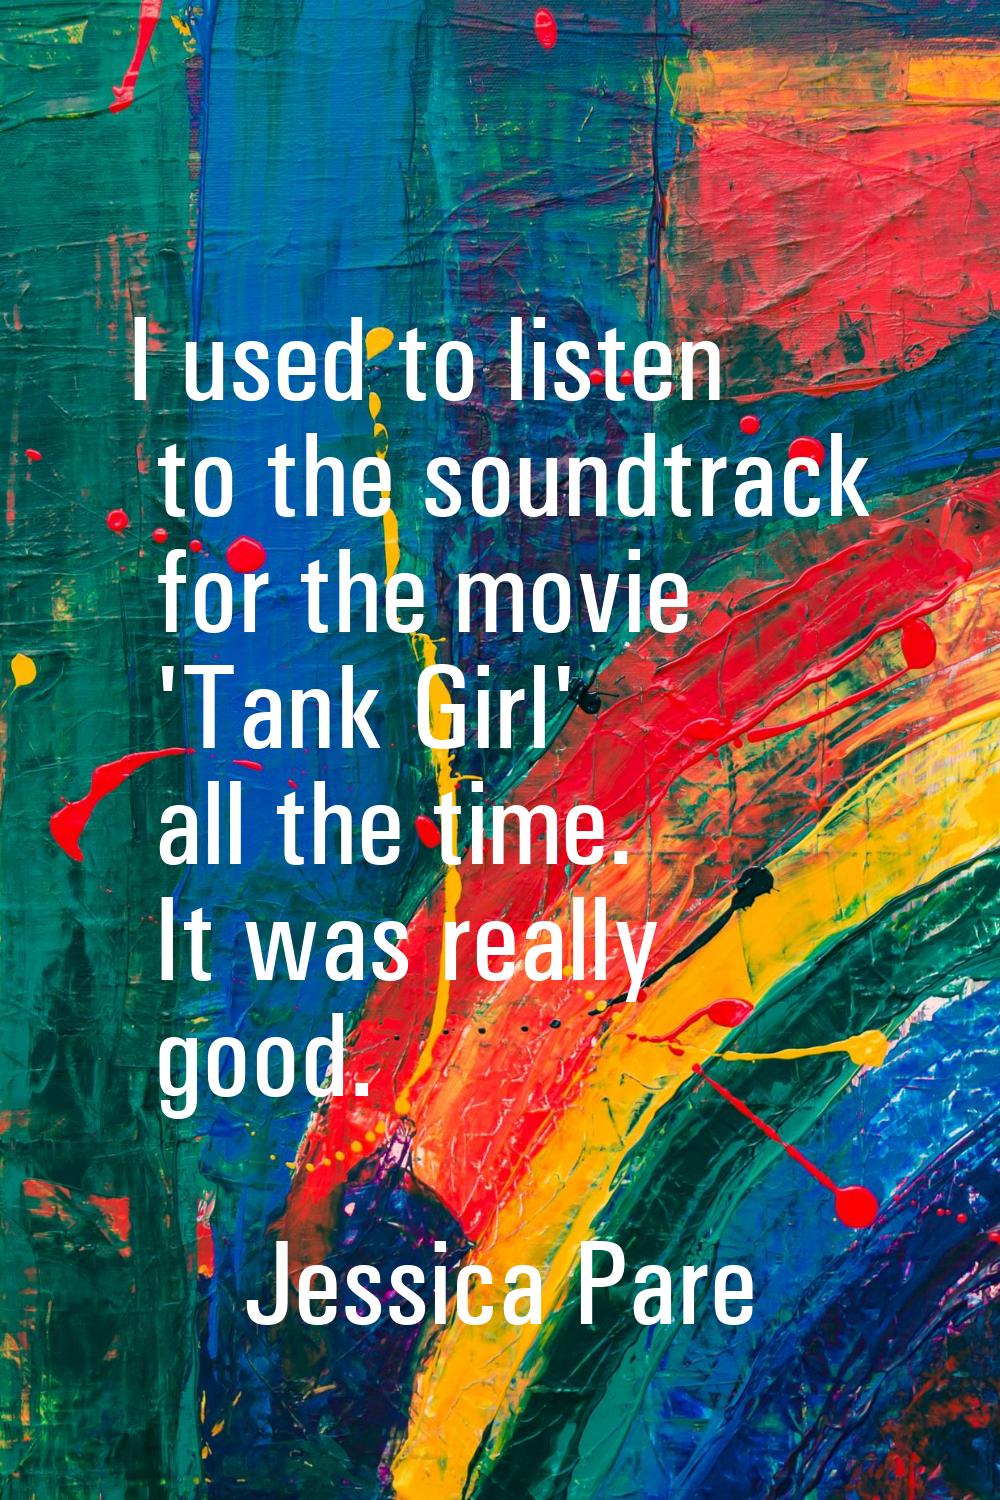 I used to listen to the soundtrack for the movie 'Tank Girl' all the time. It was really good.